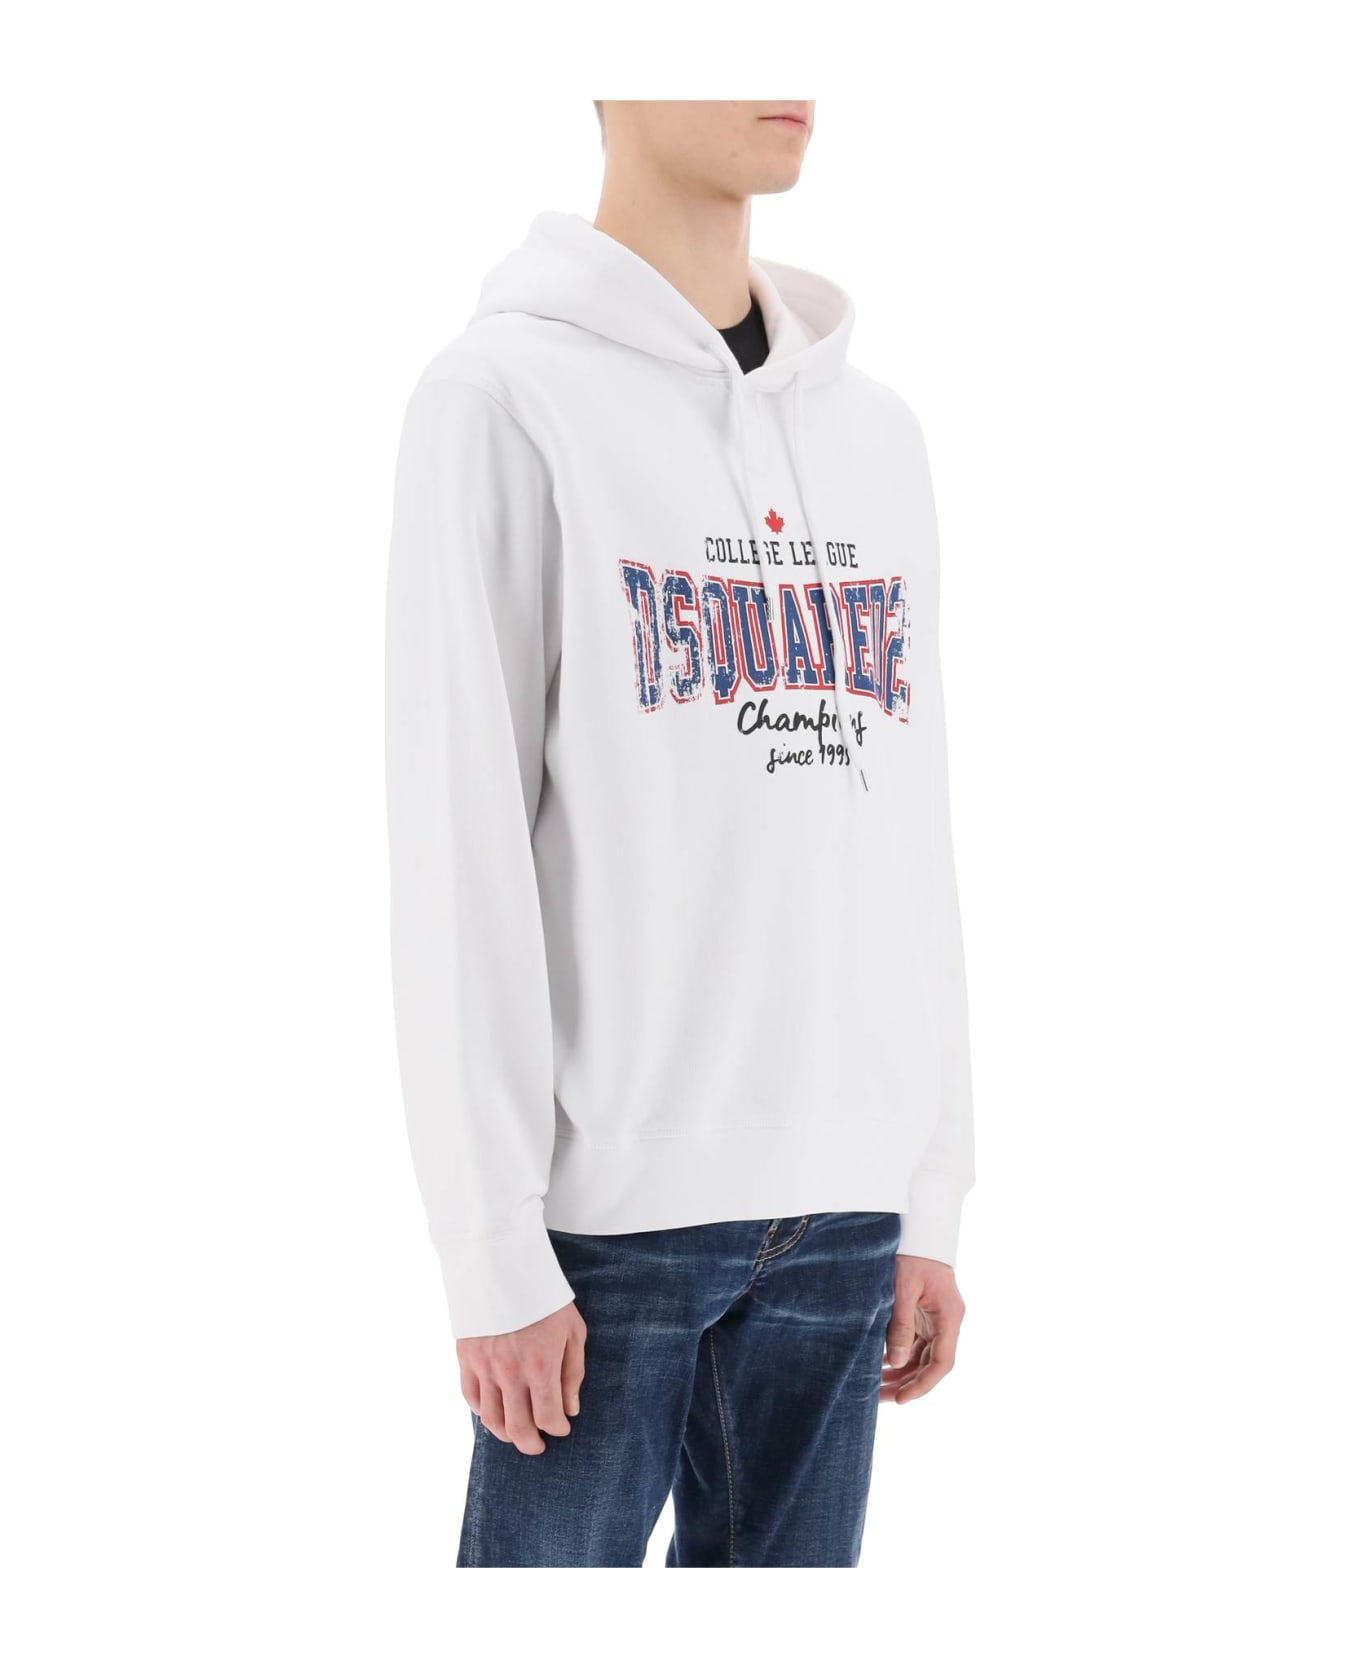 Dsquared2 College League Cool Fit Hoodie - WHITE (White)